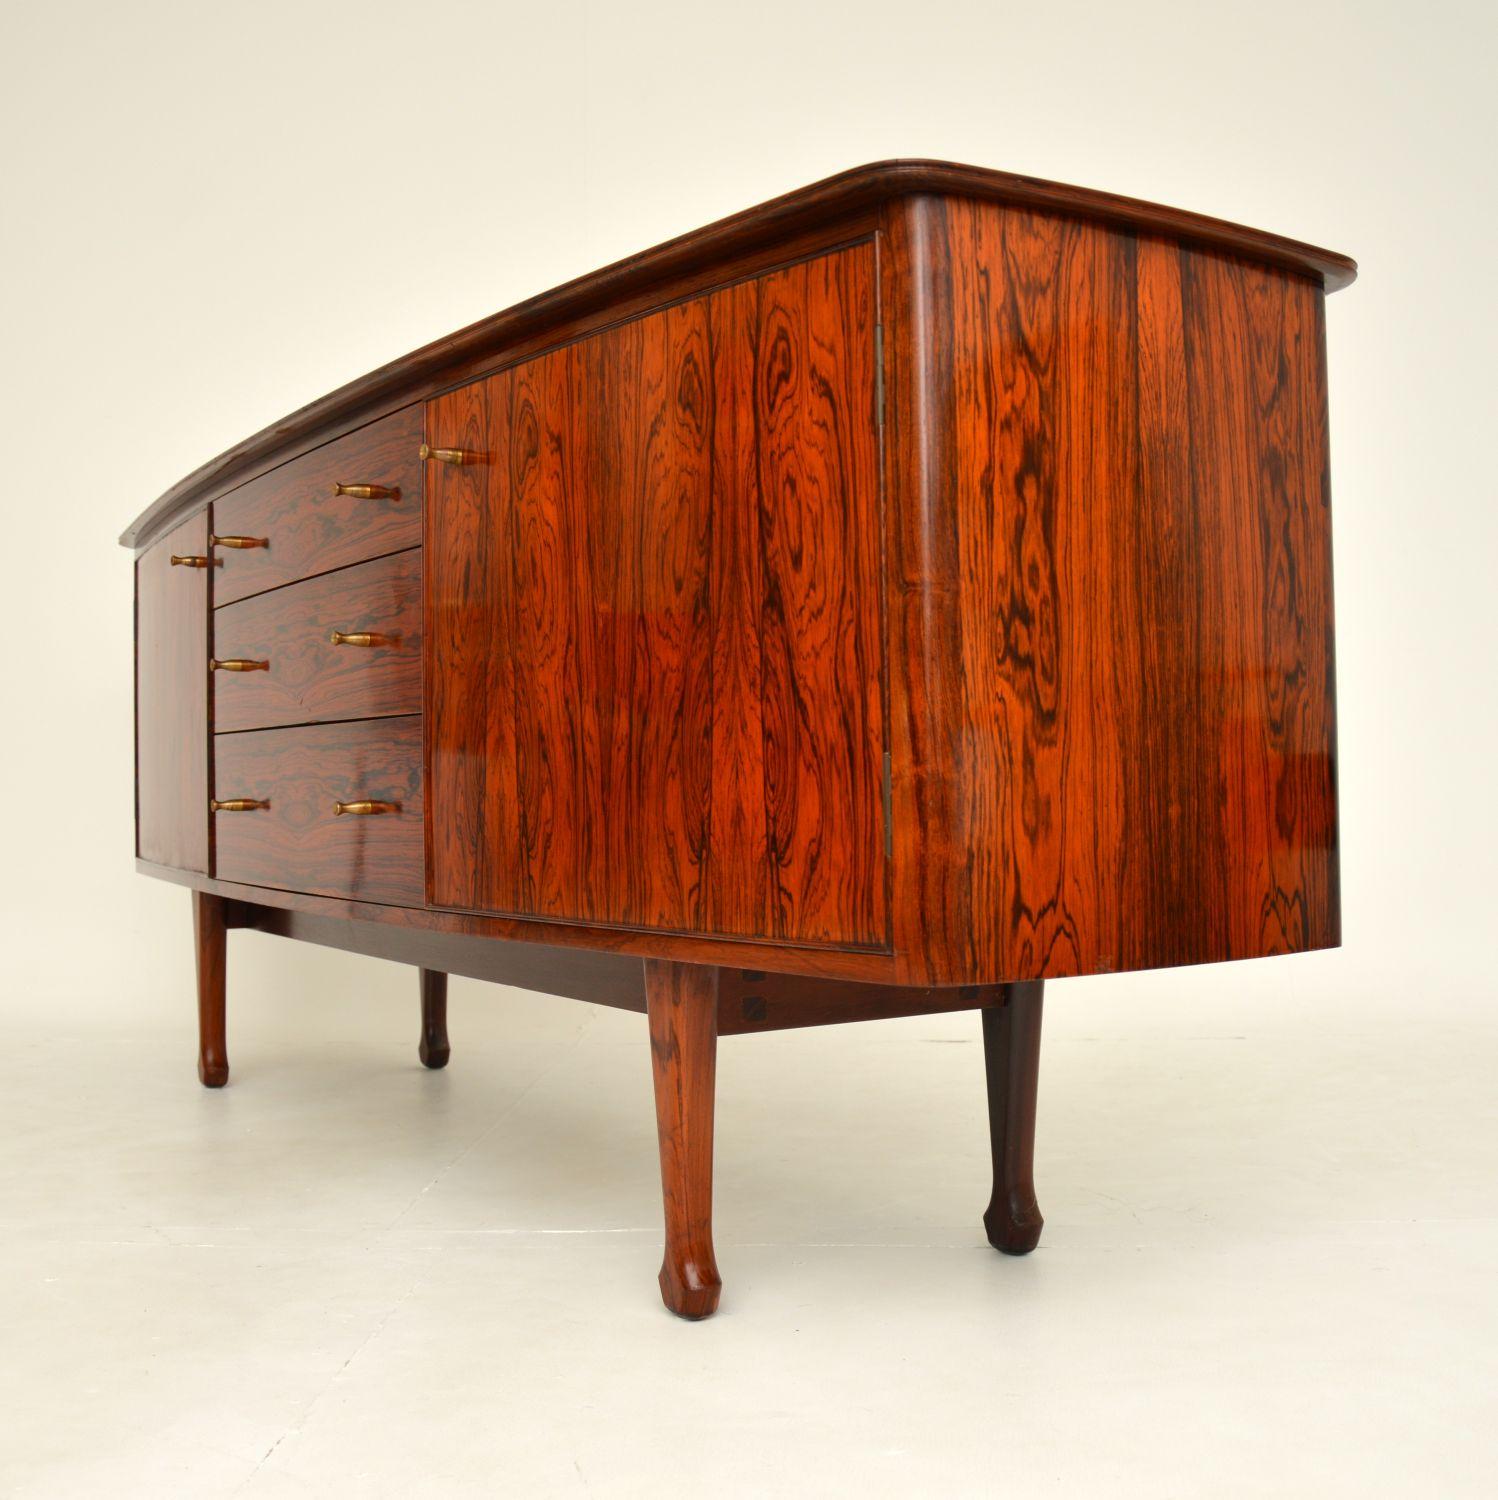 Wood 1950's Vintage Sideboard by a.J Milne for Heal's